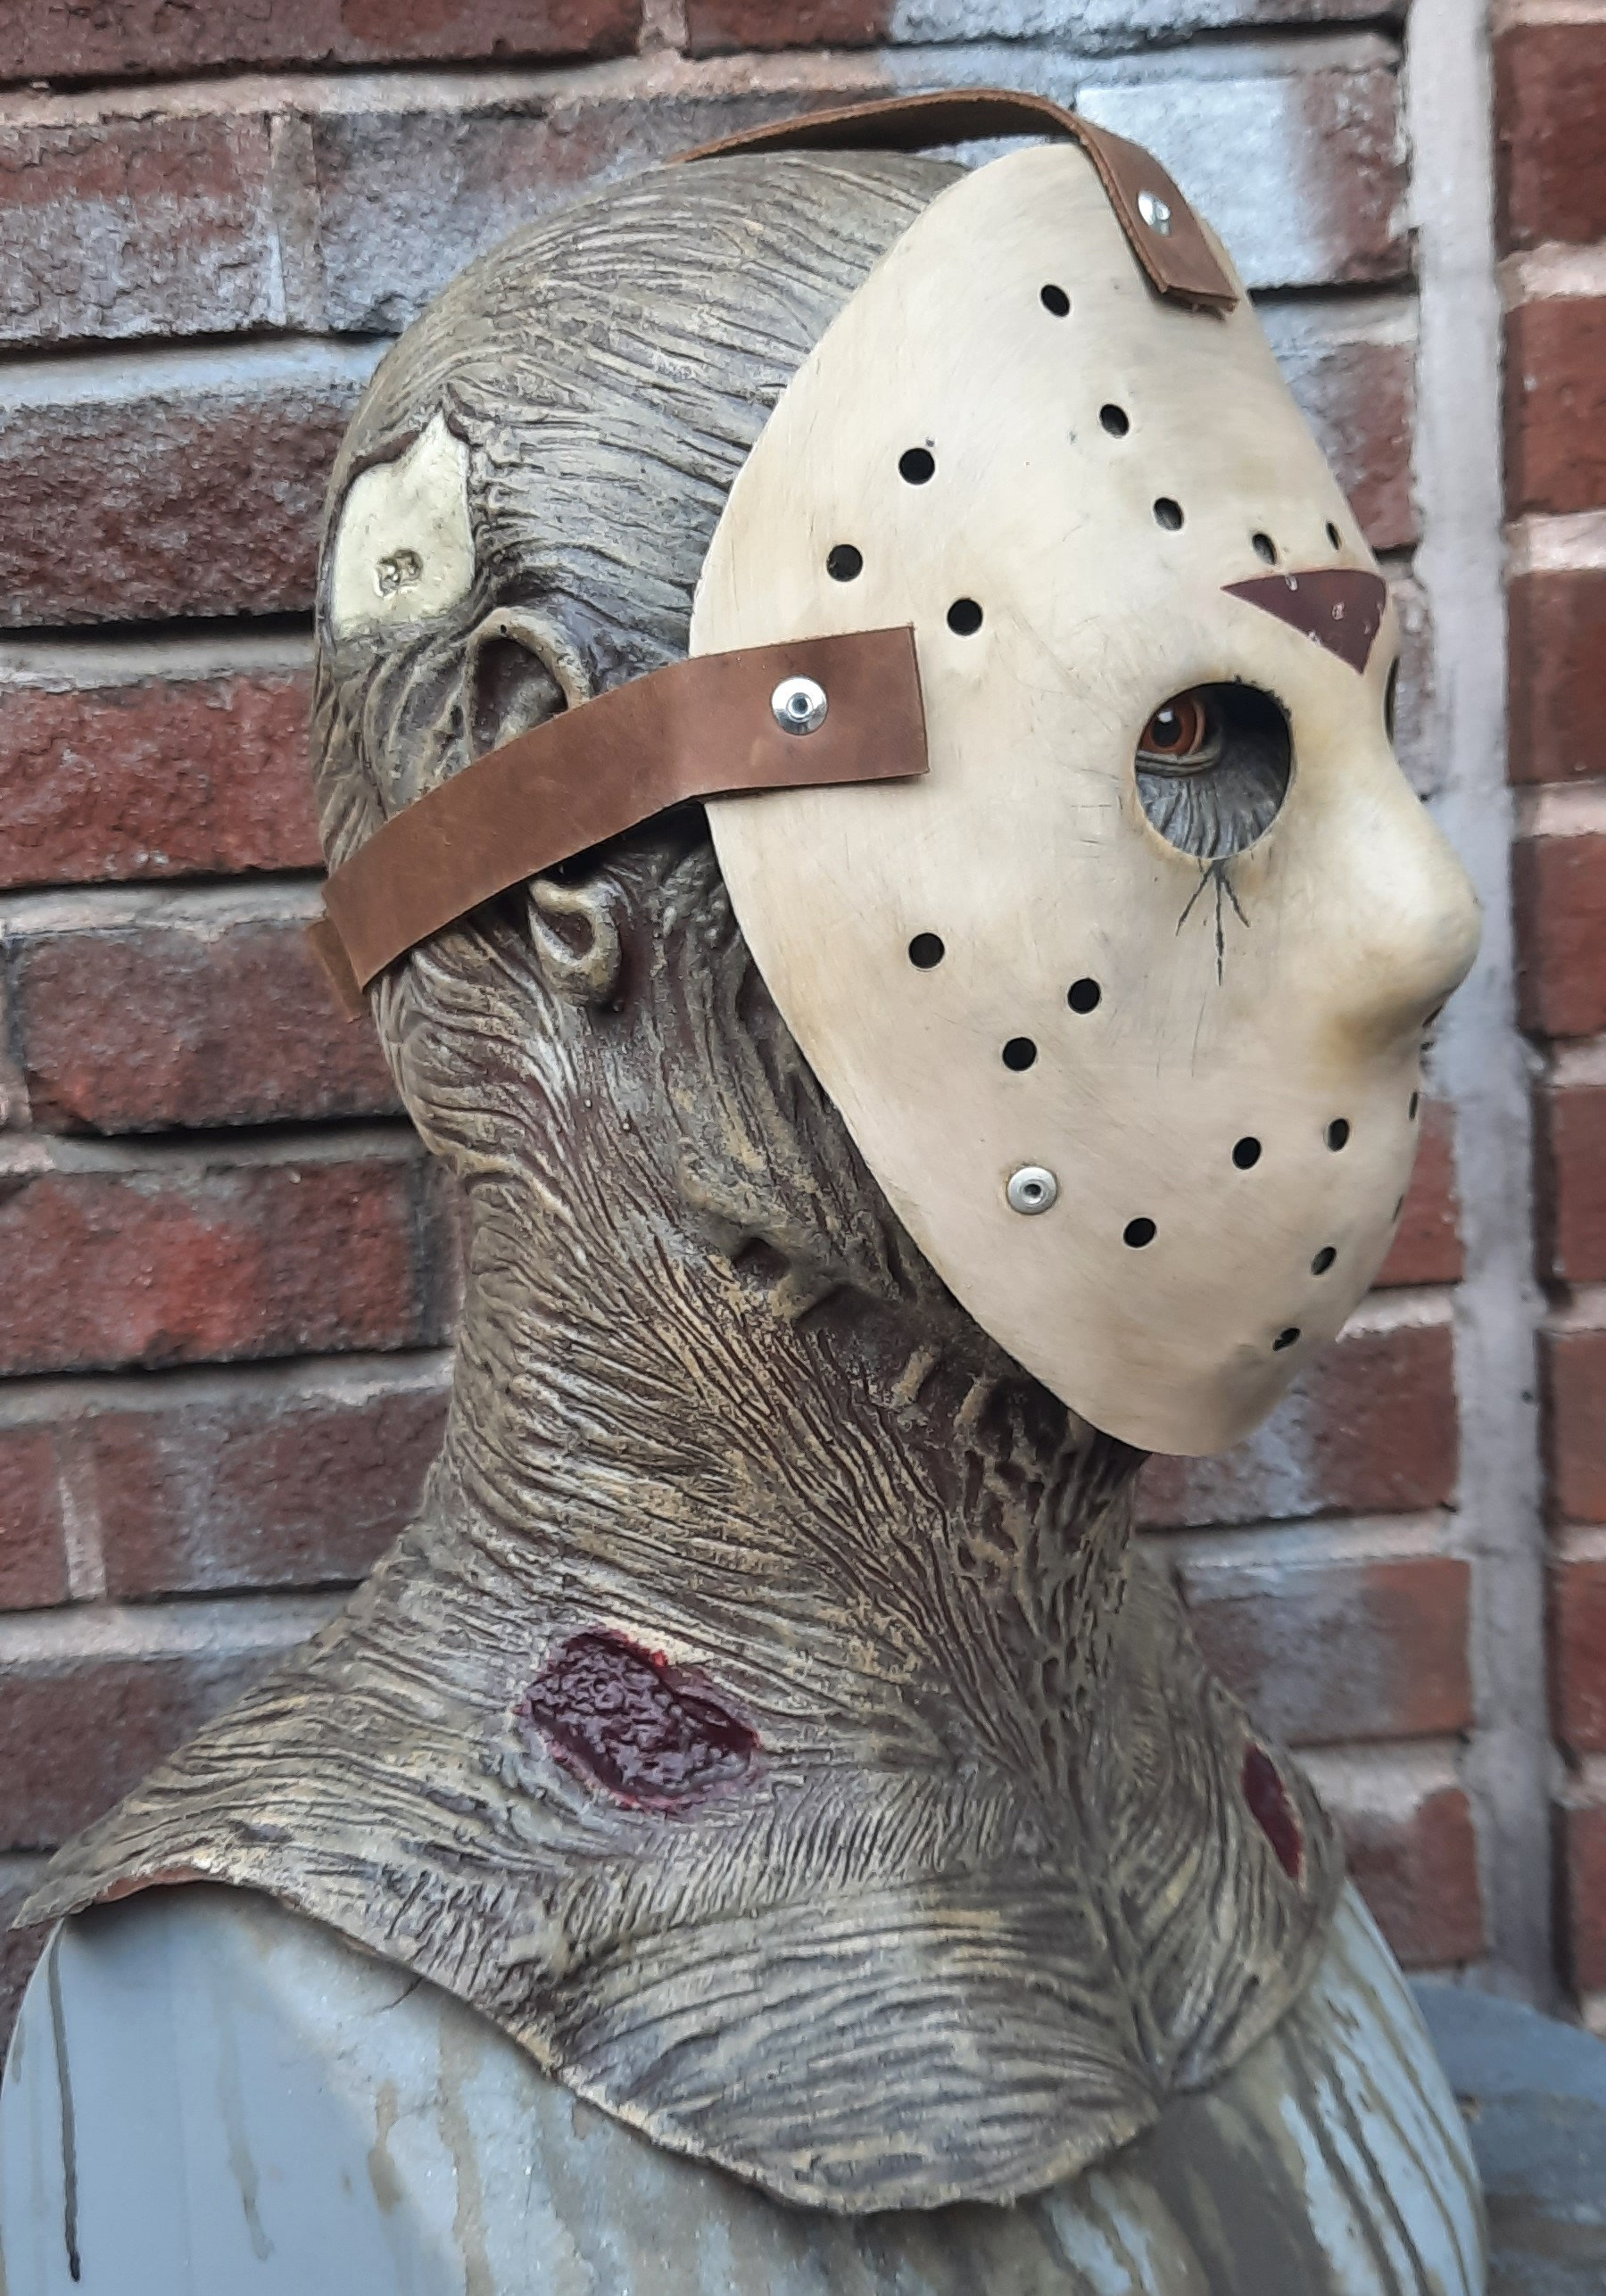 Friday the 13th Vlll Wearable Latex and Hockey Mask 